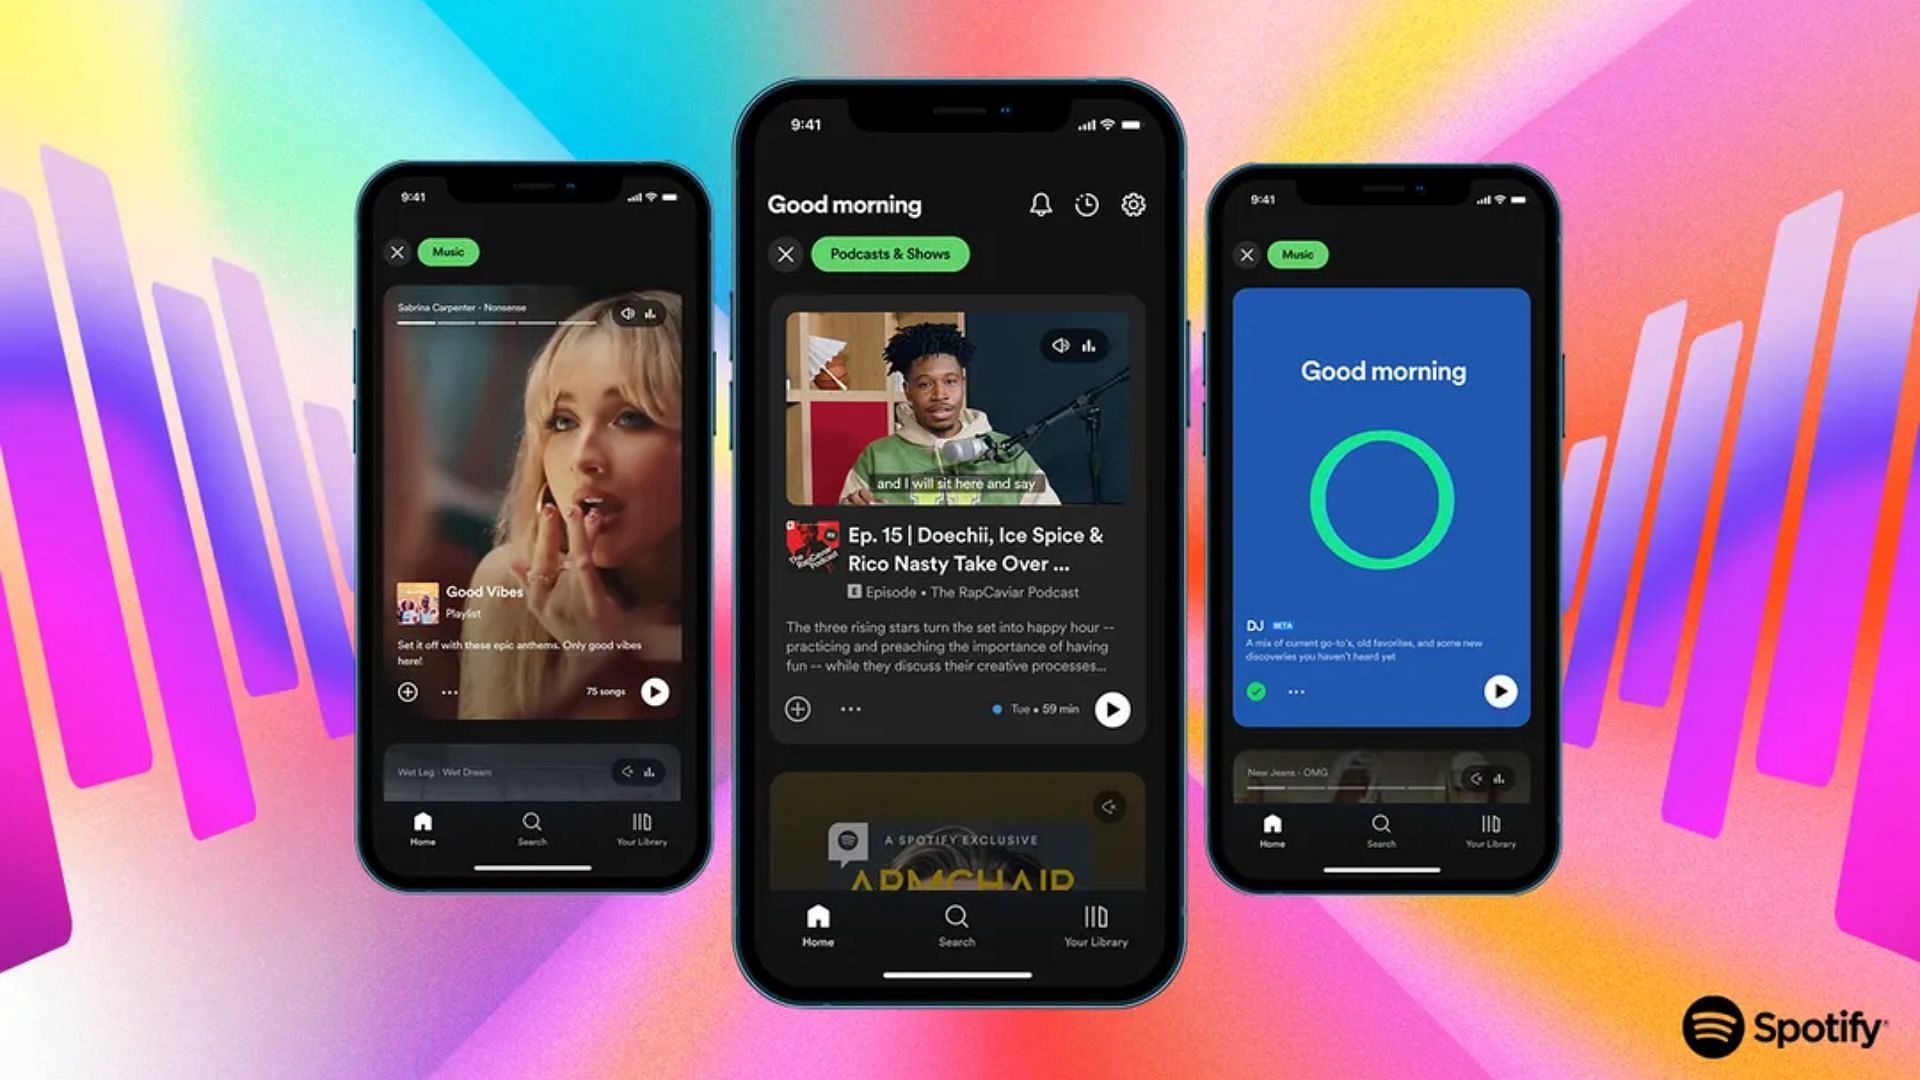 NewNowPlaying gives the Spotify app's Now Playing interface a cosmetic  facelift